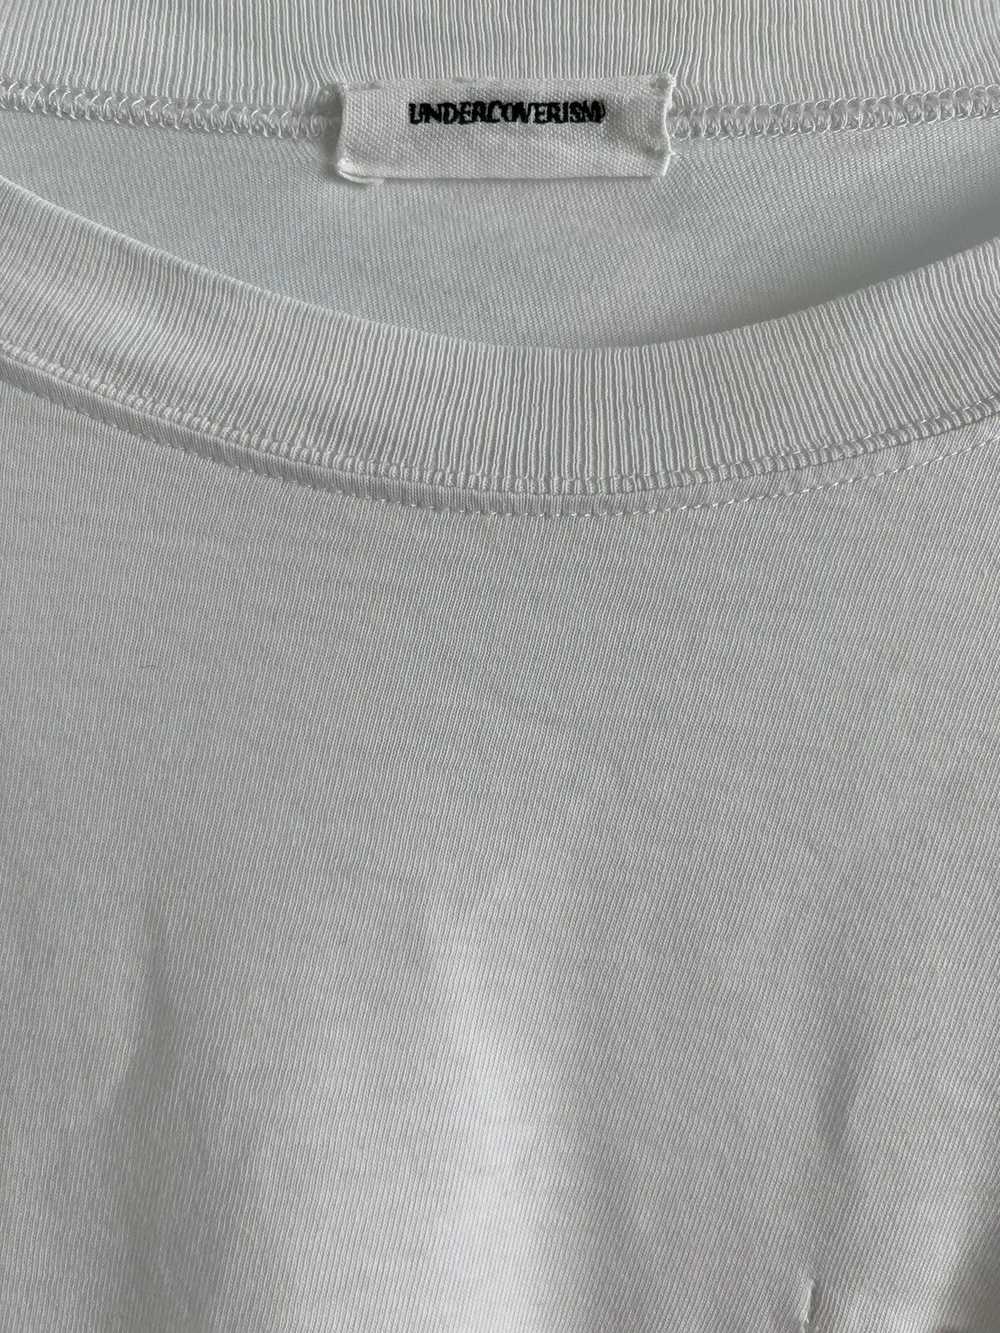 Undercover Undercover SS13 double layered tshirt - image 3